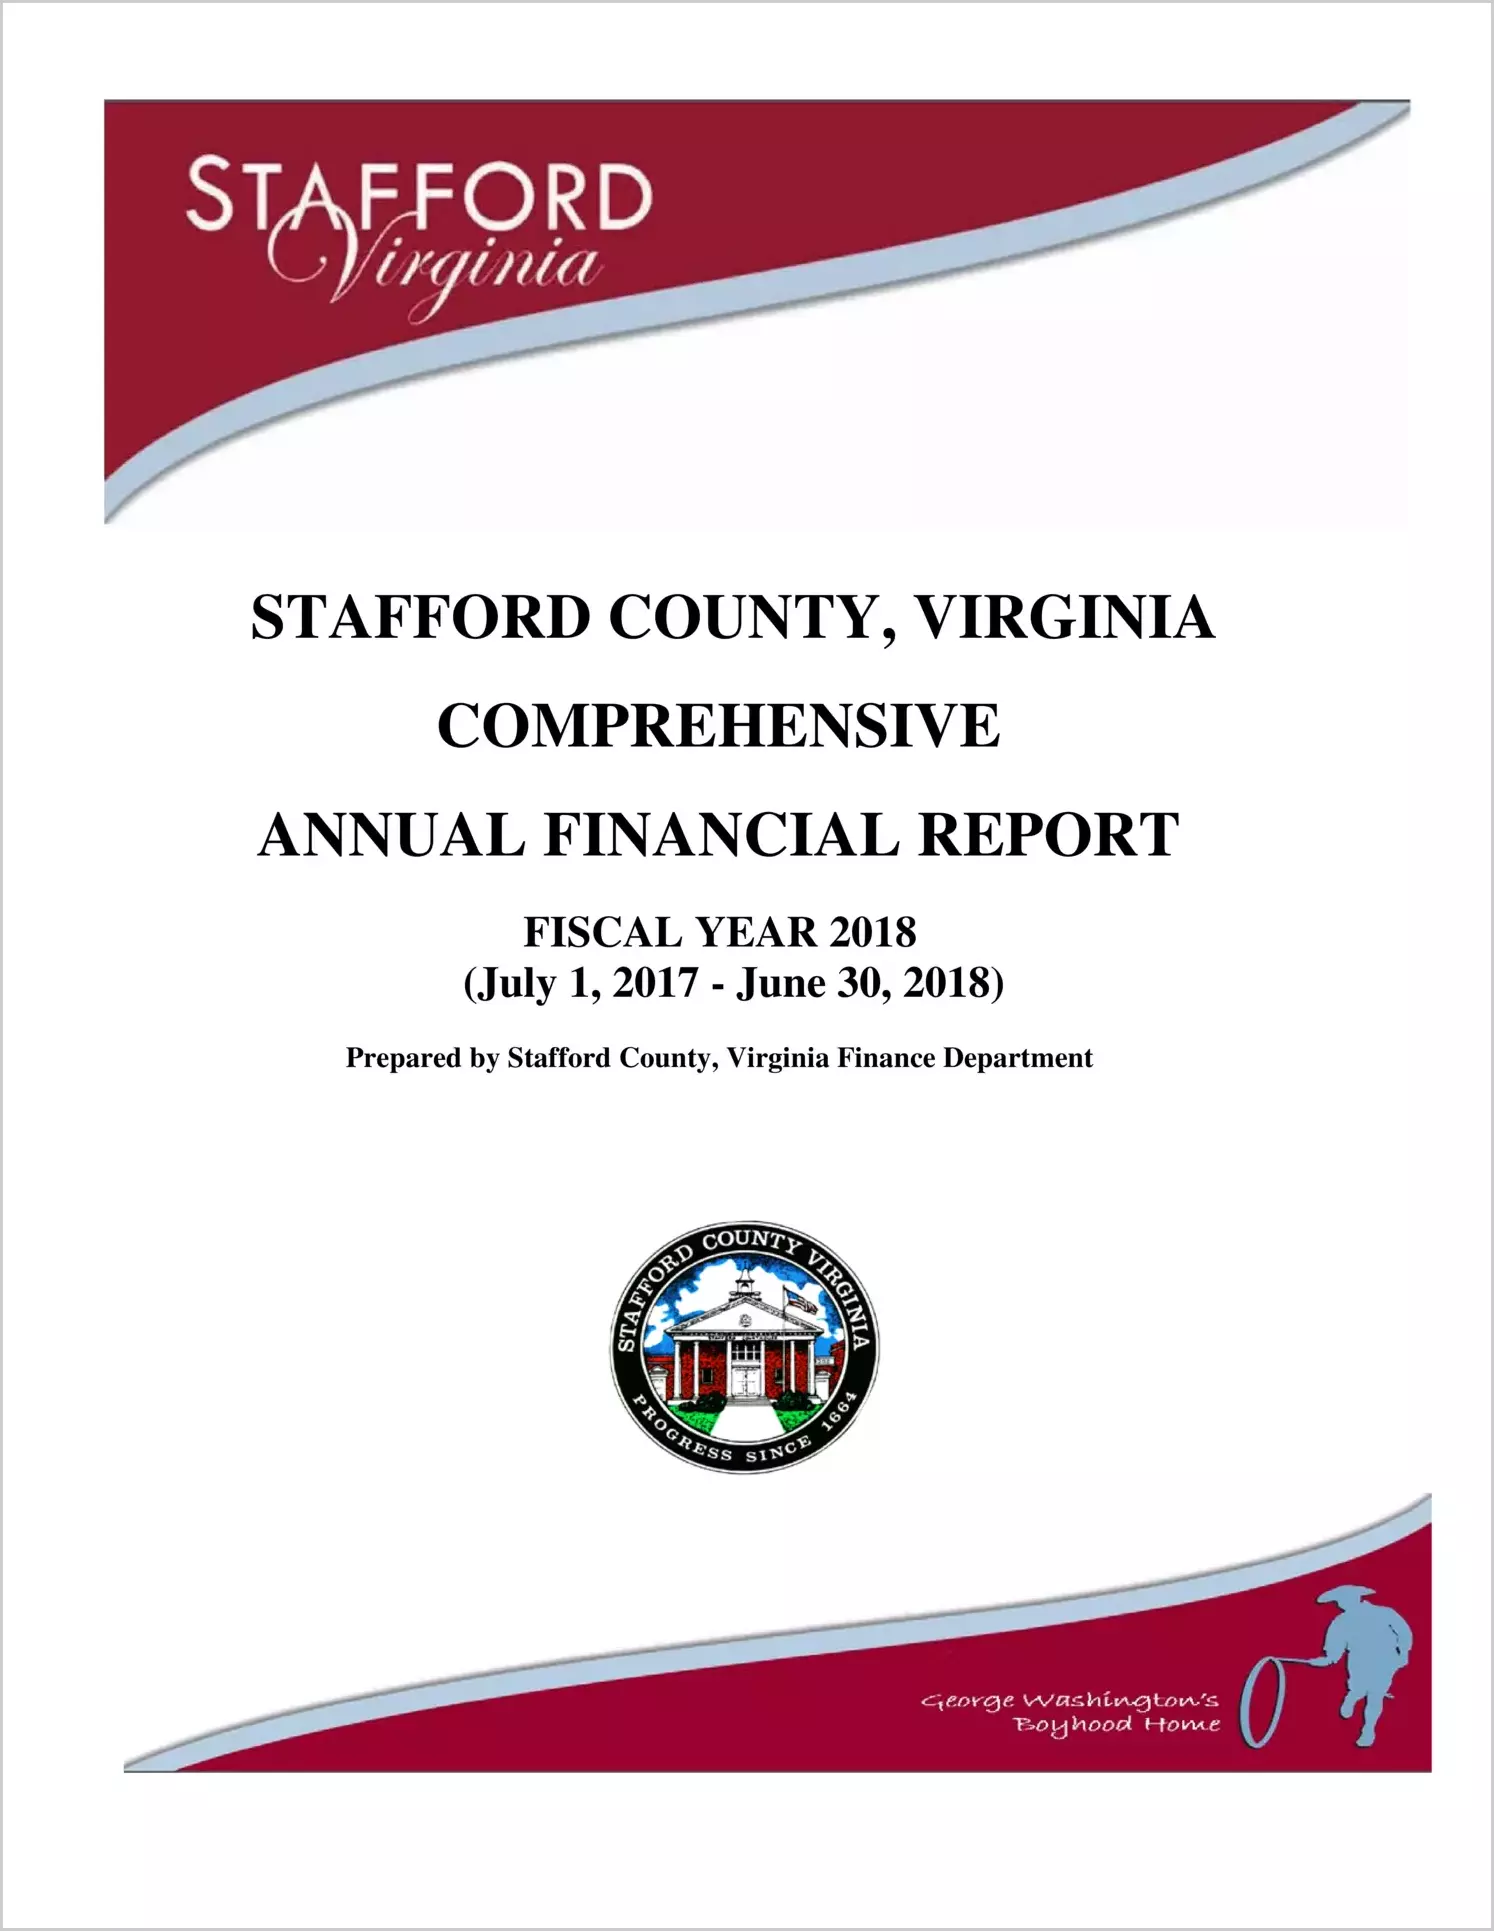 2018 Annual Financial Report for County of Stafford